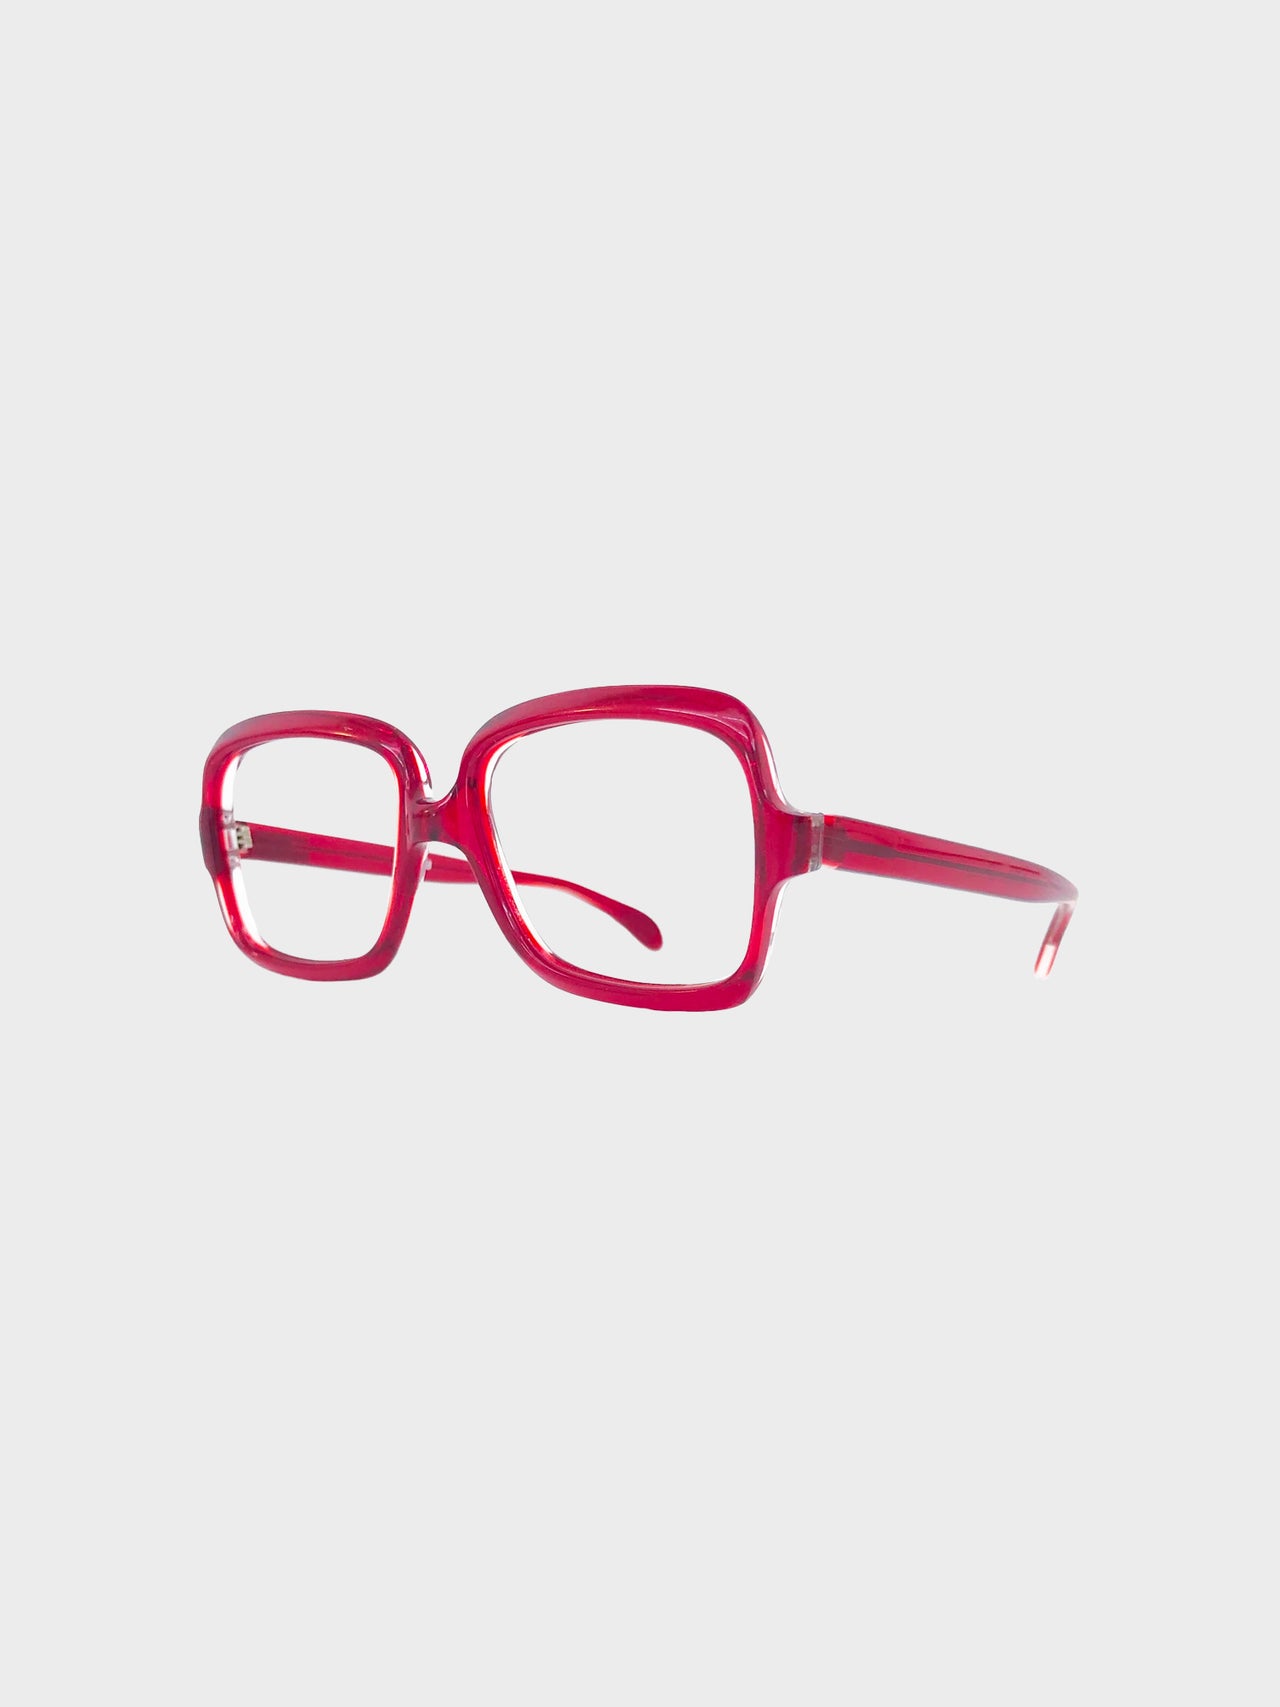 FRENCH VINTAGE / Clear glasses (RED) #FV11